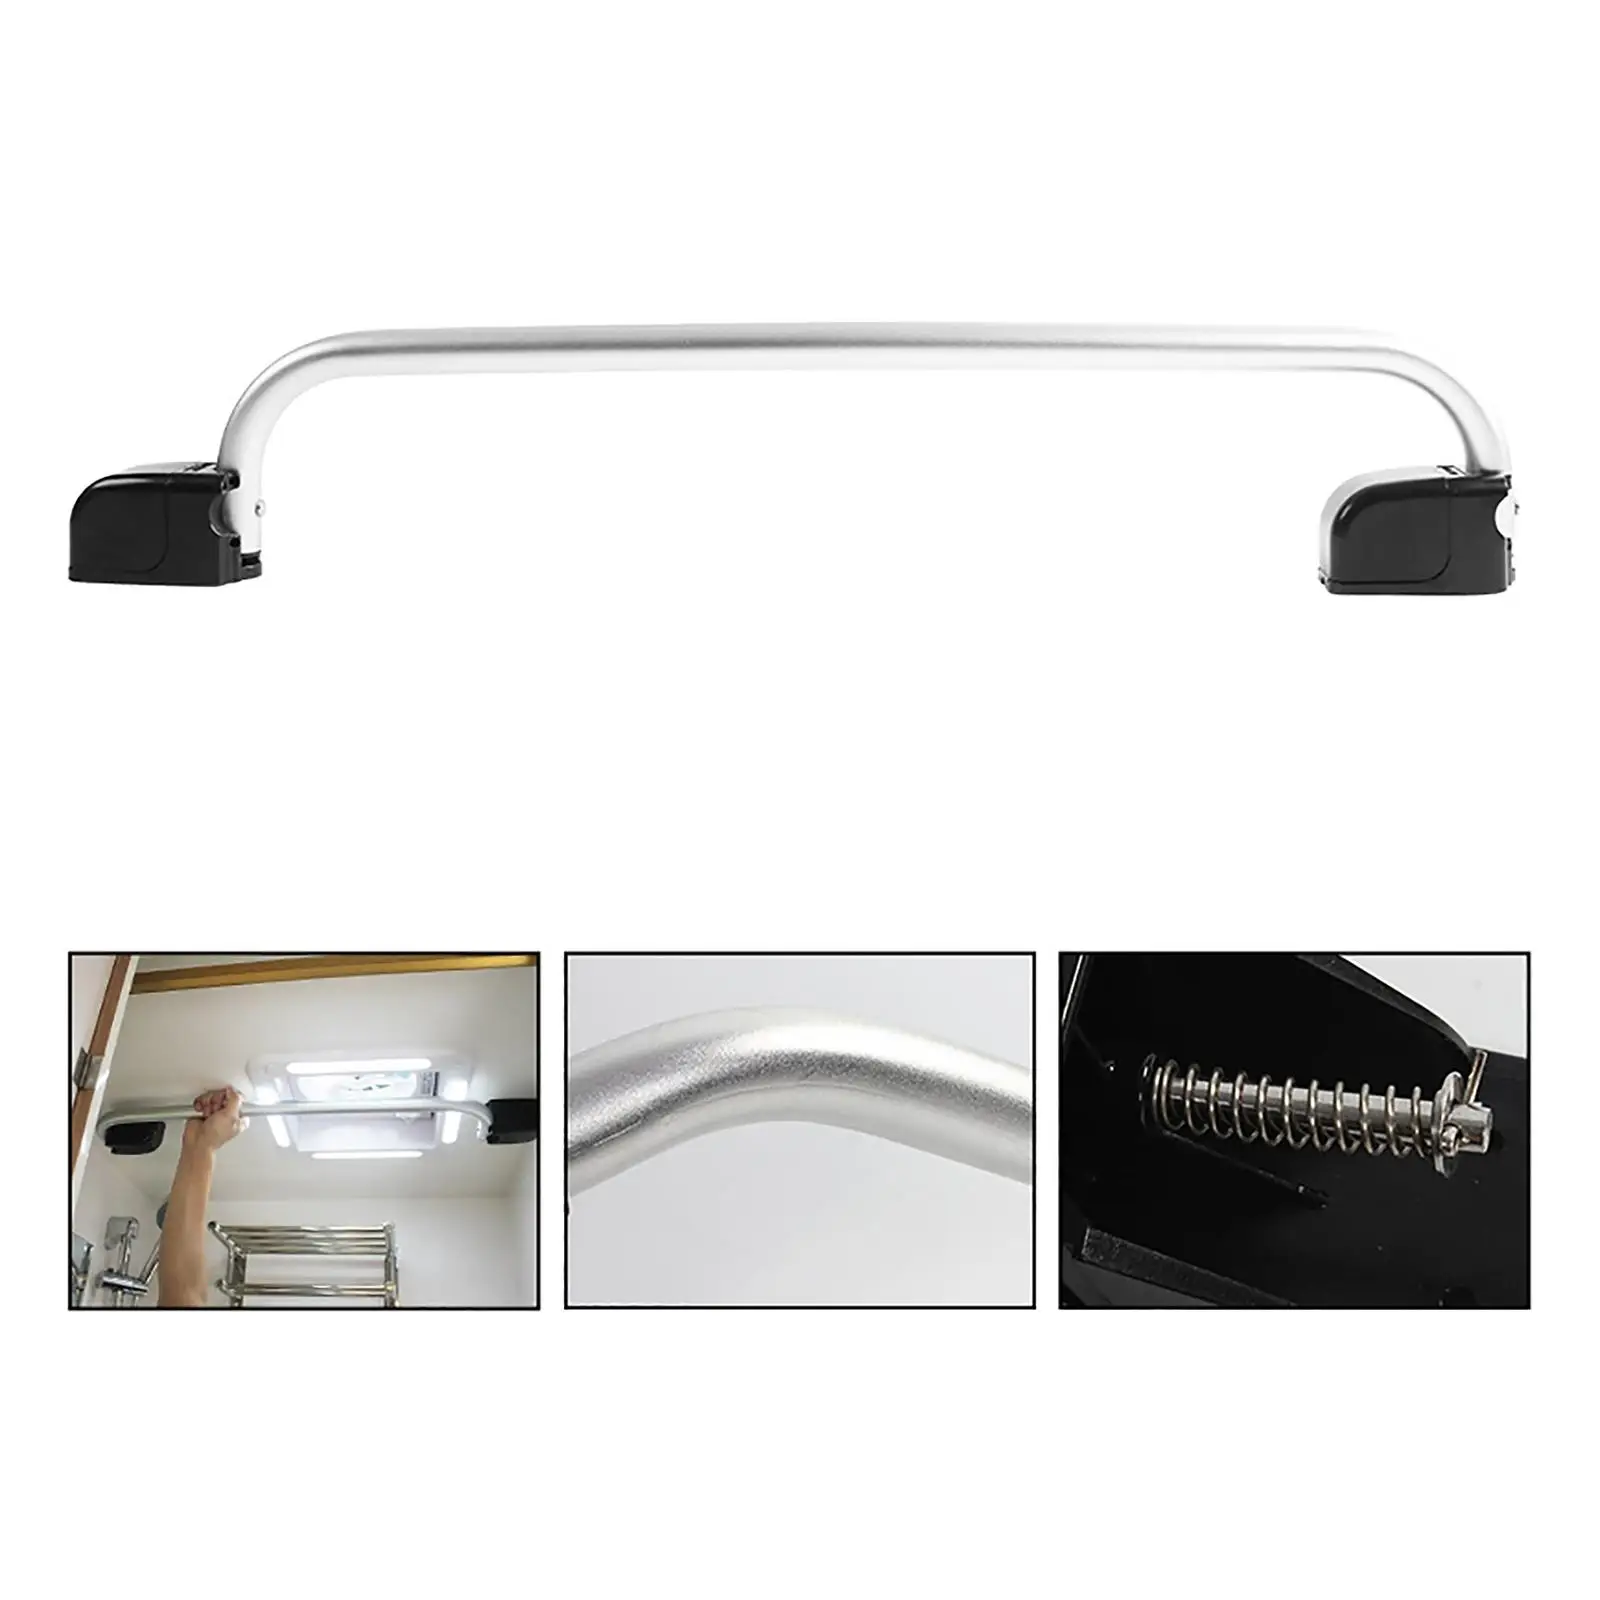 Grab Bar Foldable Clothes Rack RV Top Folding Handrail Fits for Bathroom Disabled